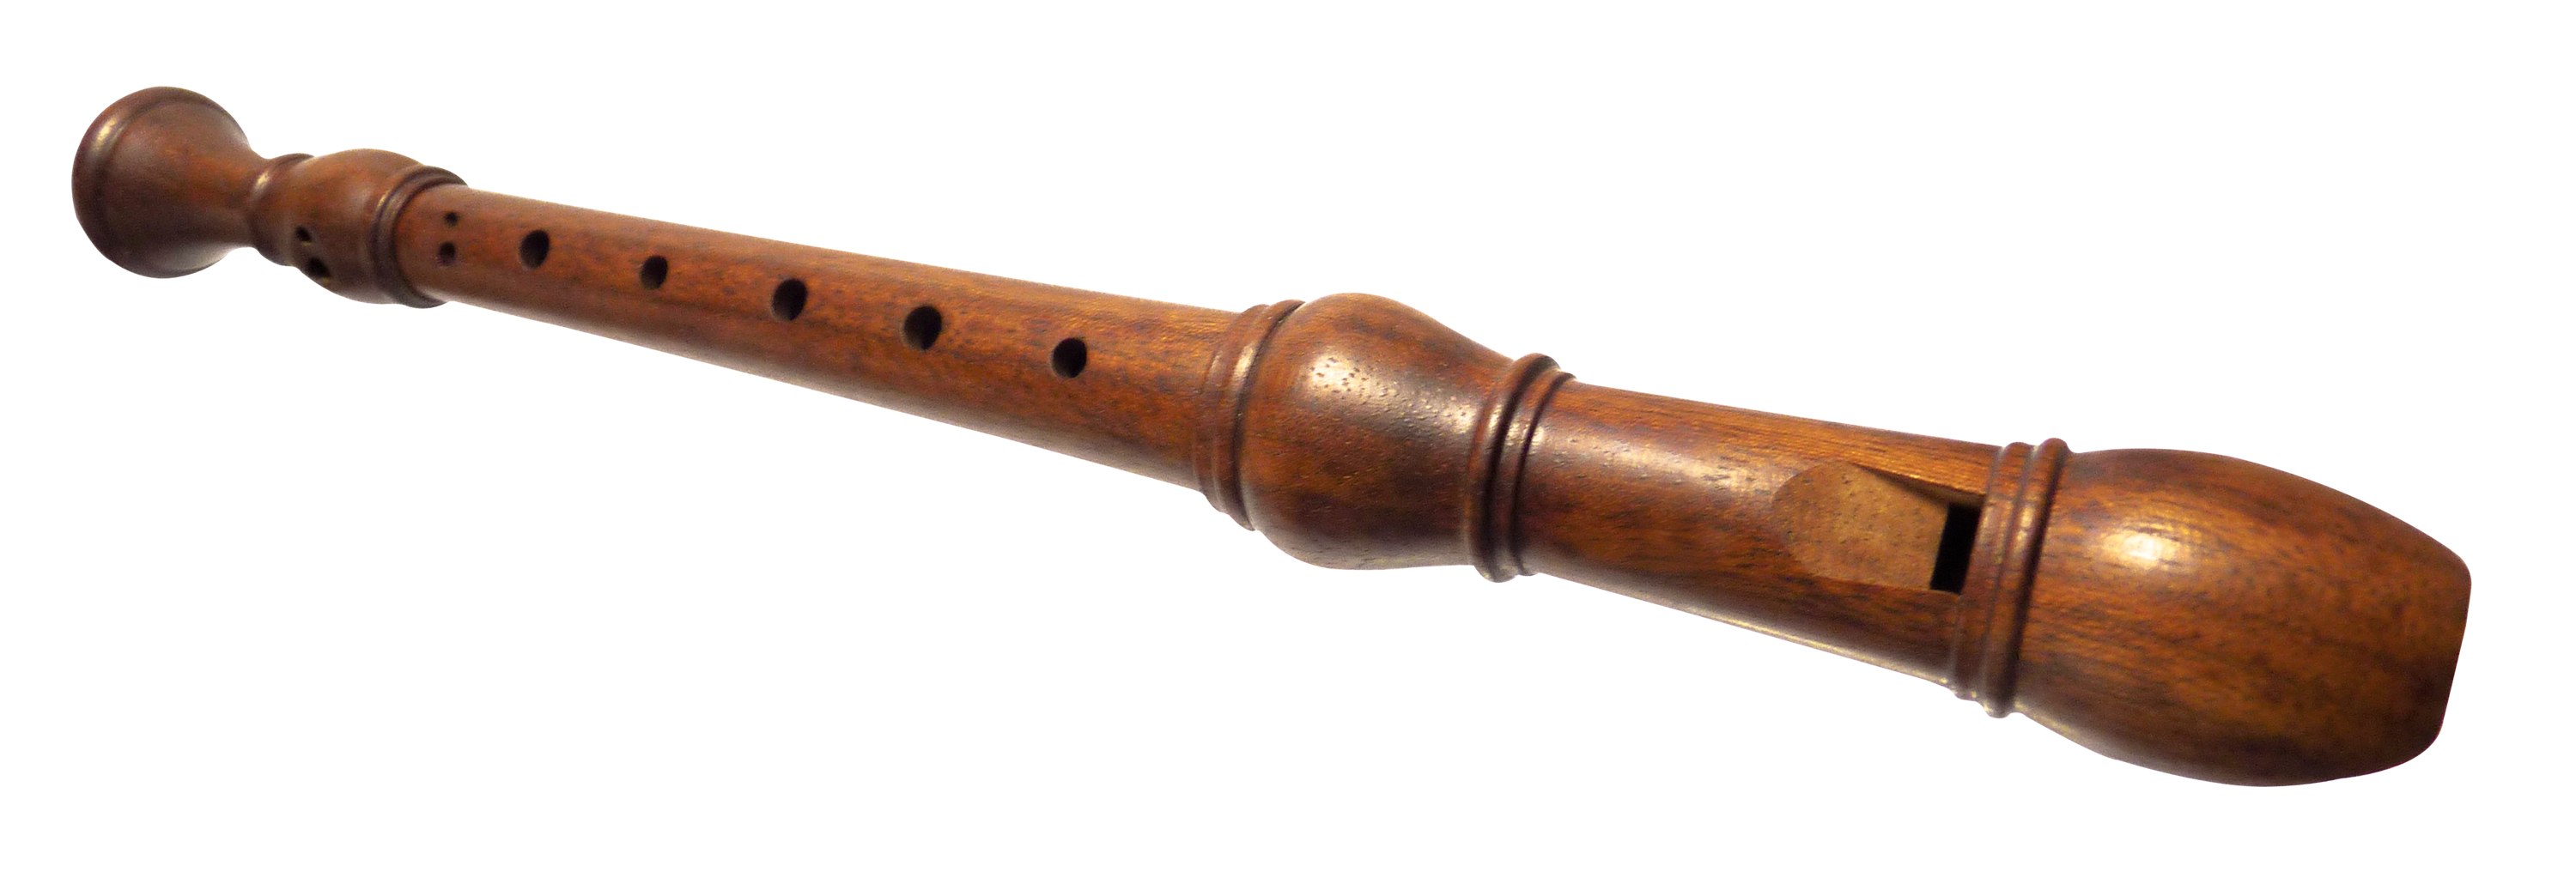 Wooden Flute PNG Image - PurePNG | Free transparent CC0 PNG Image Library